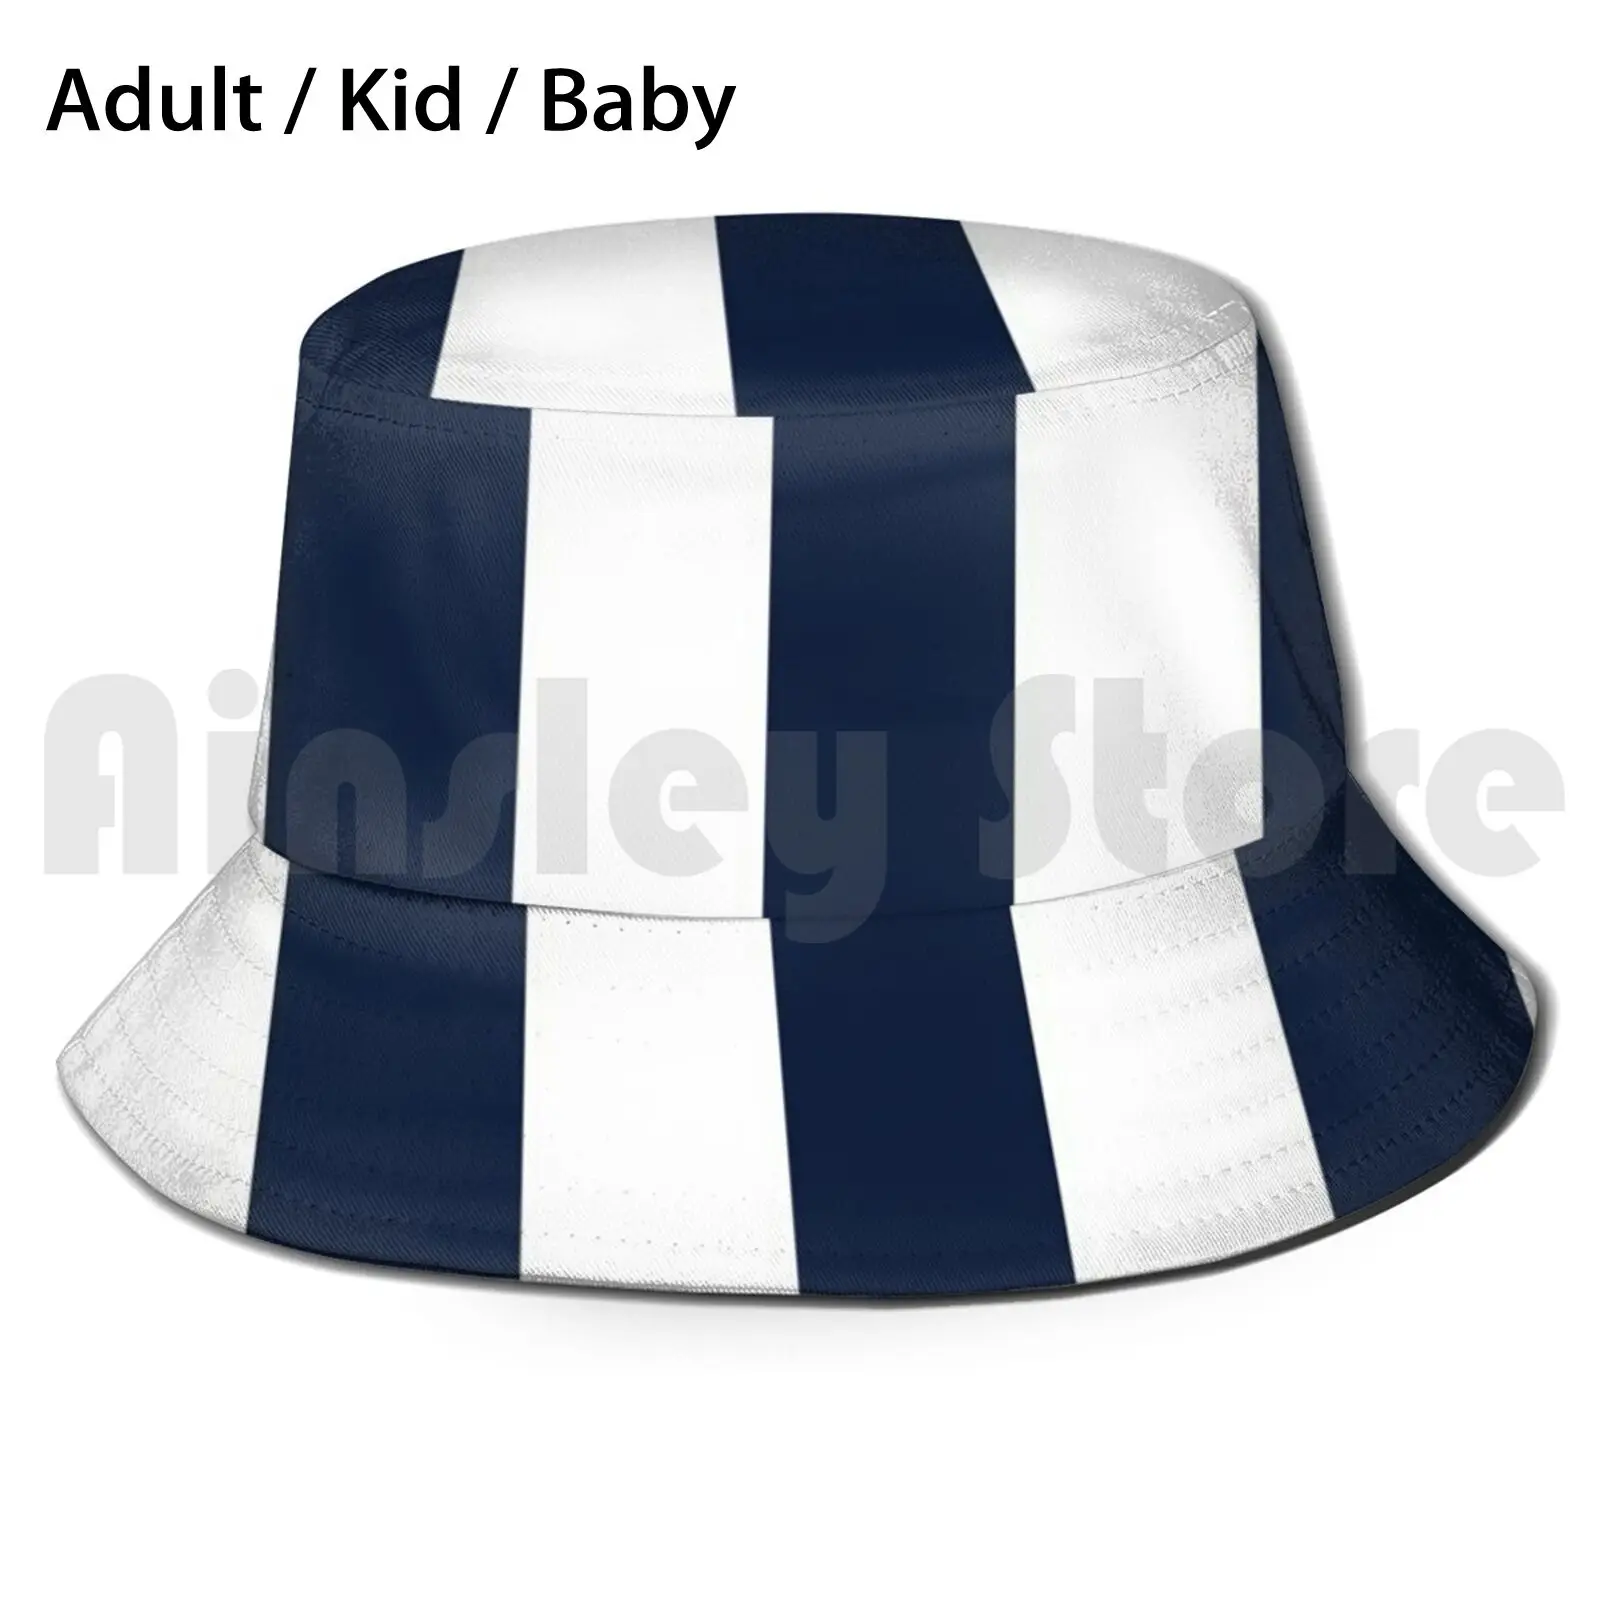 

West Brom Inspired Bucket Hat Adult kid baby Beach Sun Hats Wba West Brom West Bromwich Albion Baggies